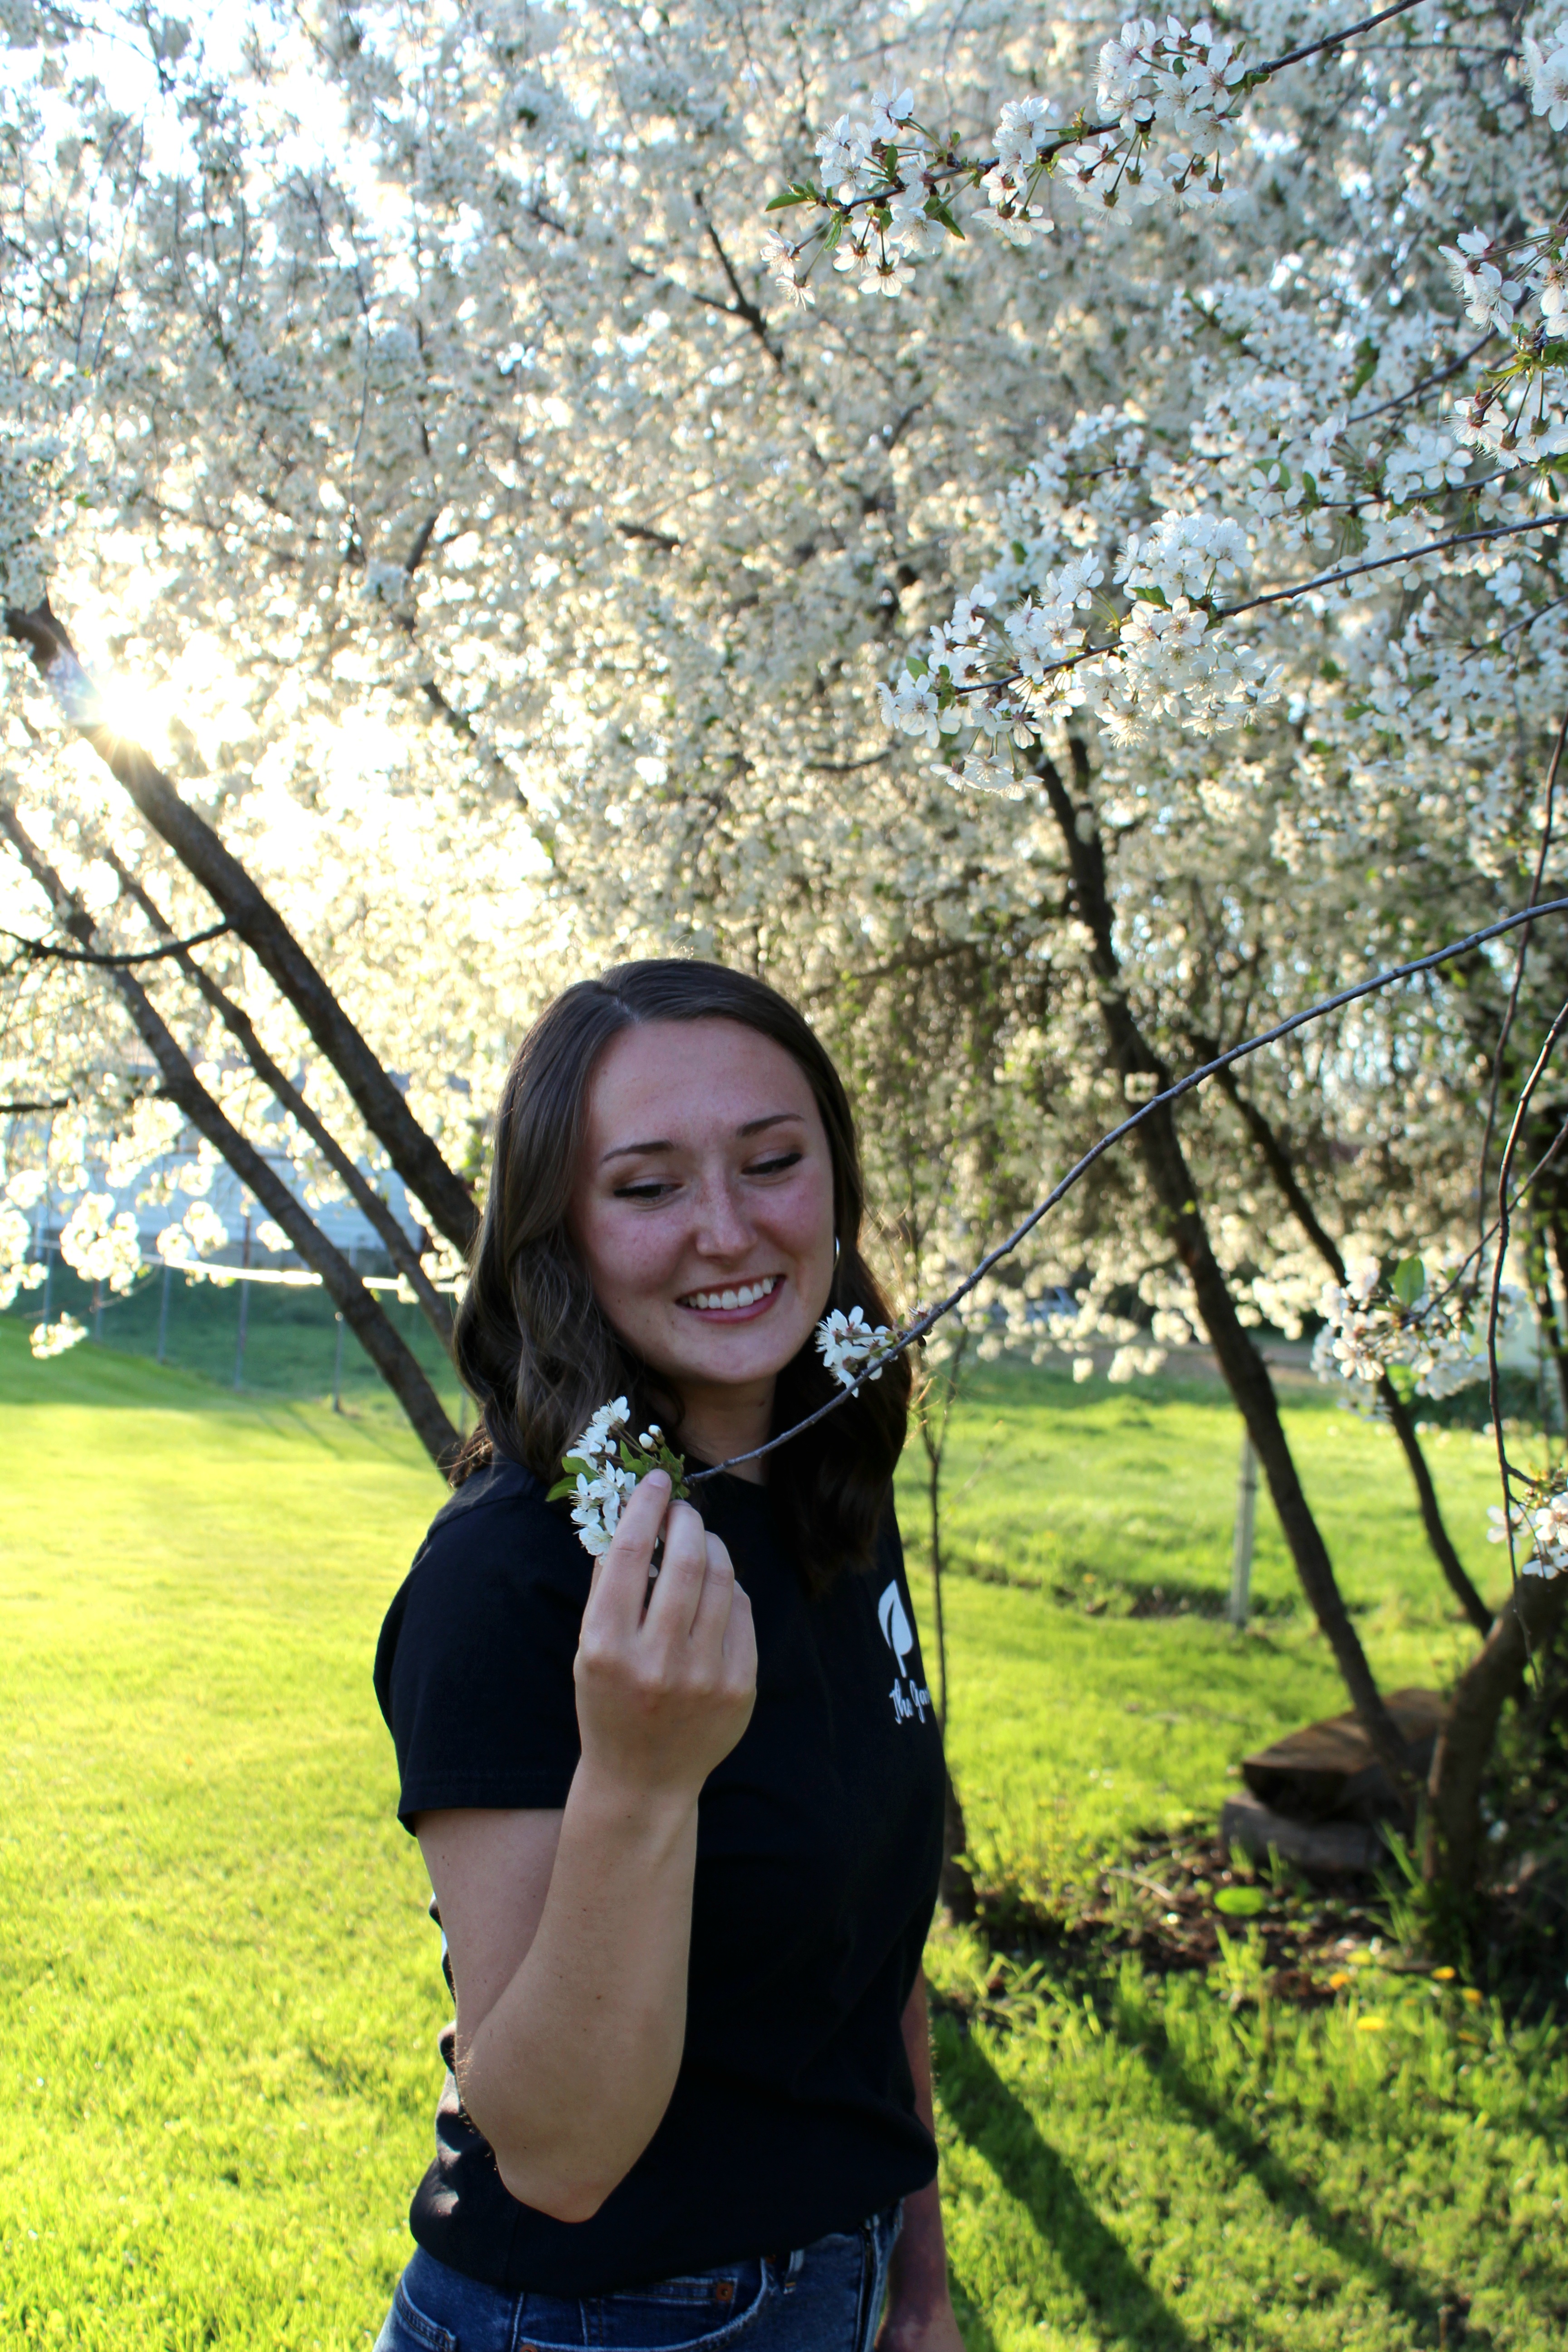 Gracie has shoulder length brown hair and is wearing a black t-shirt. She is standing underneath a tree with white flower buds.